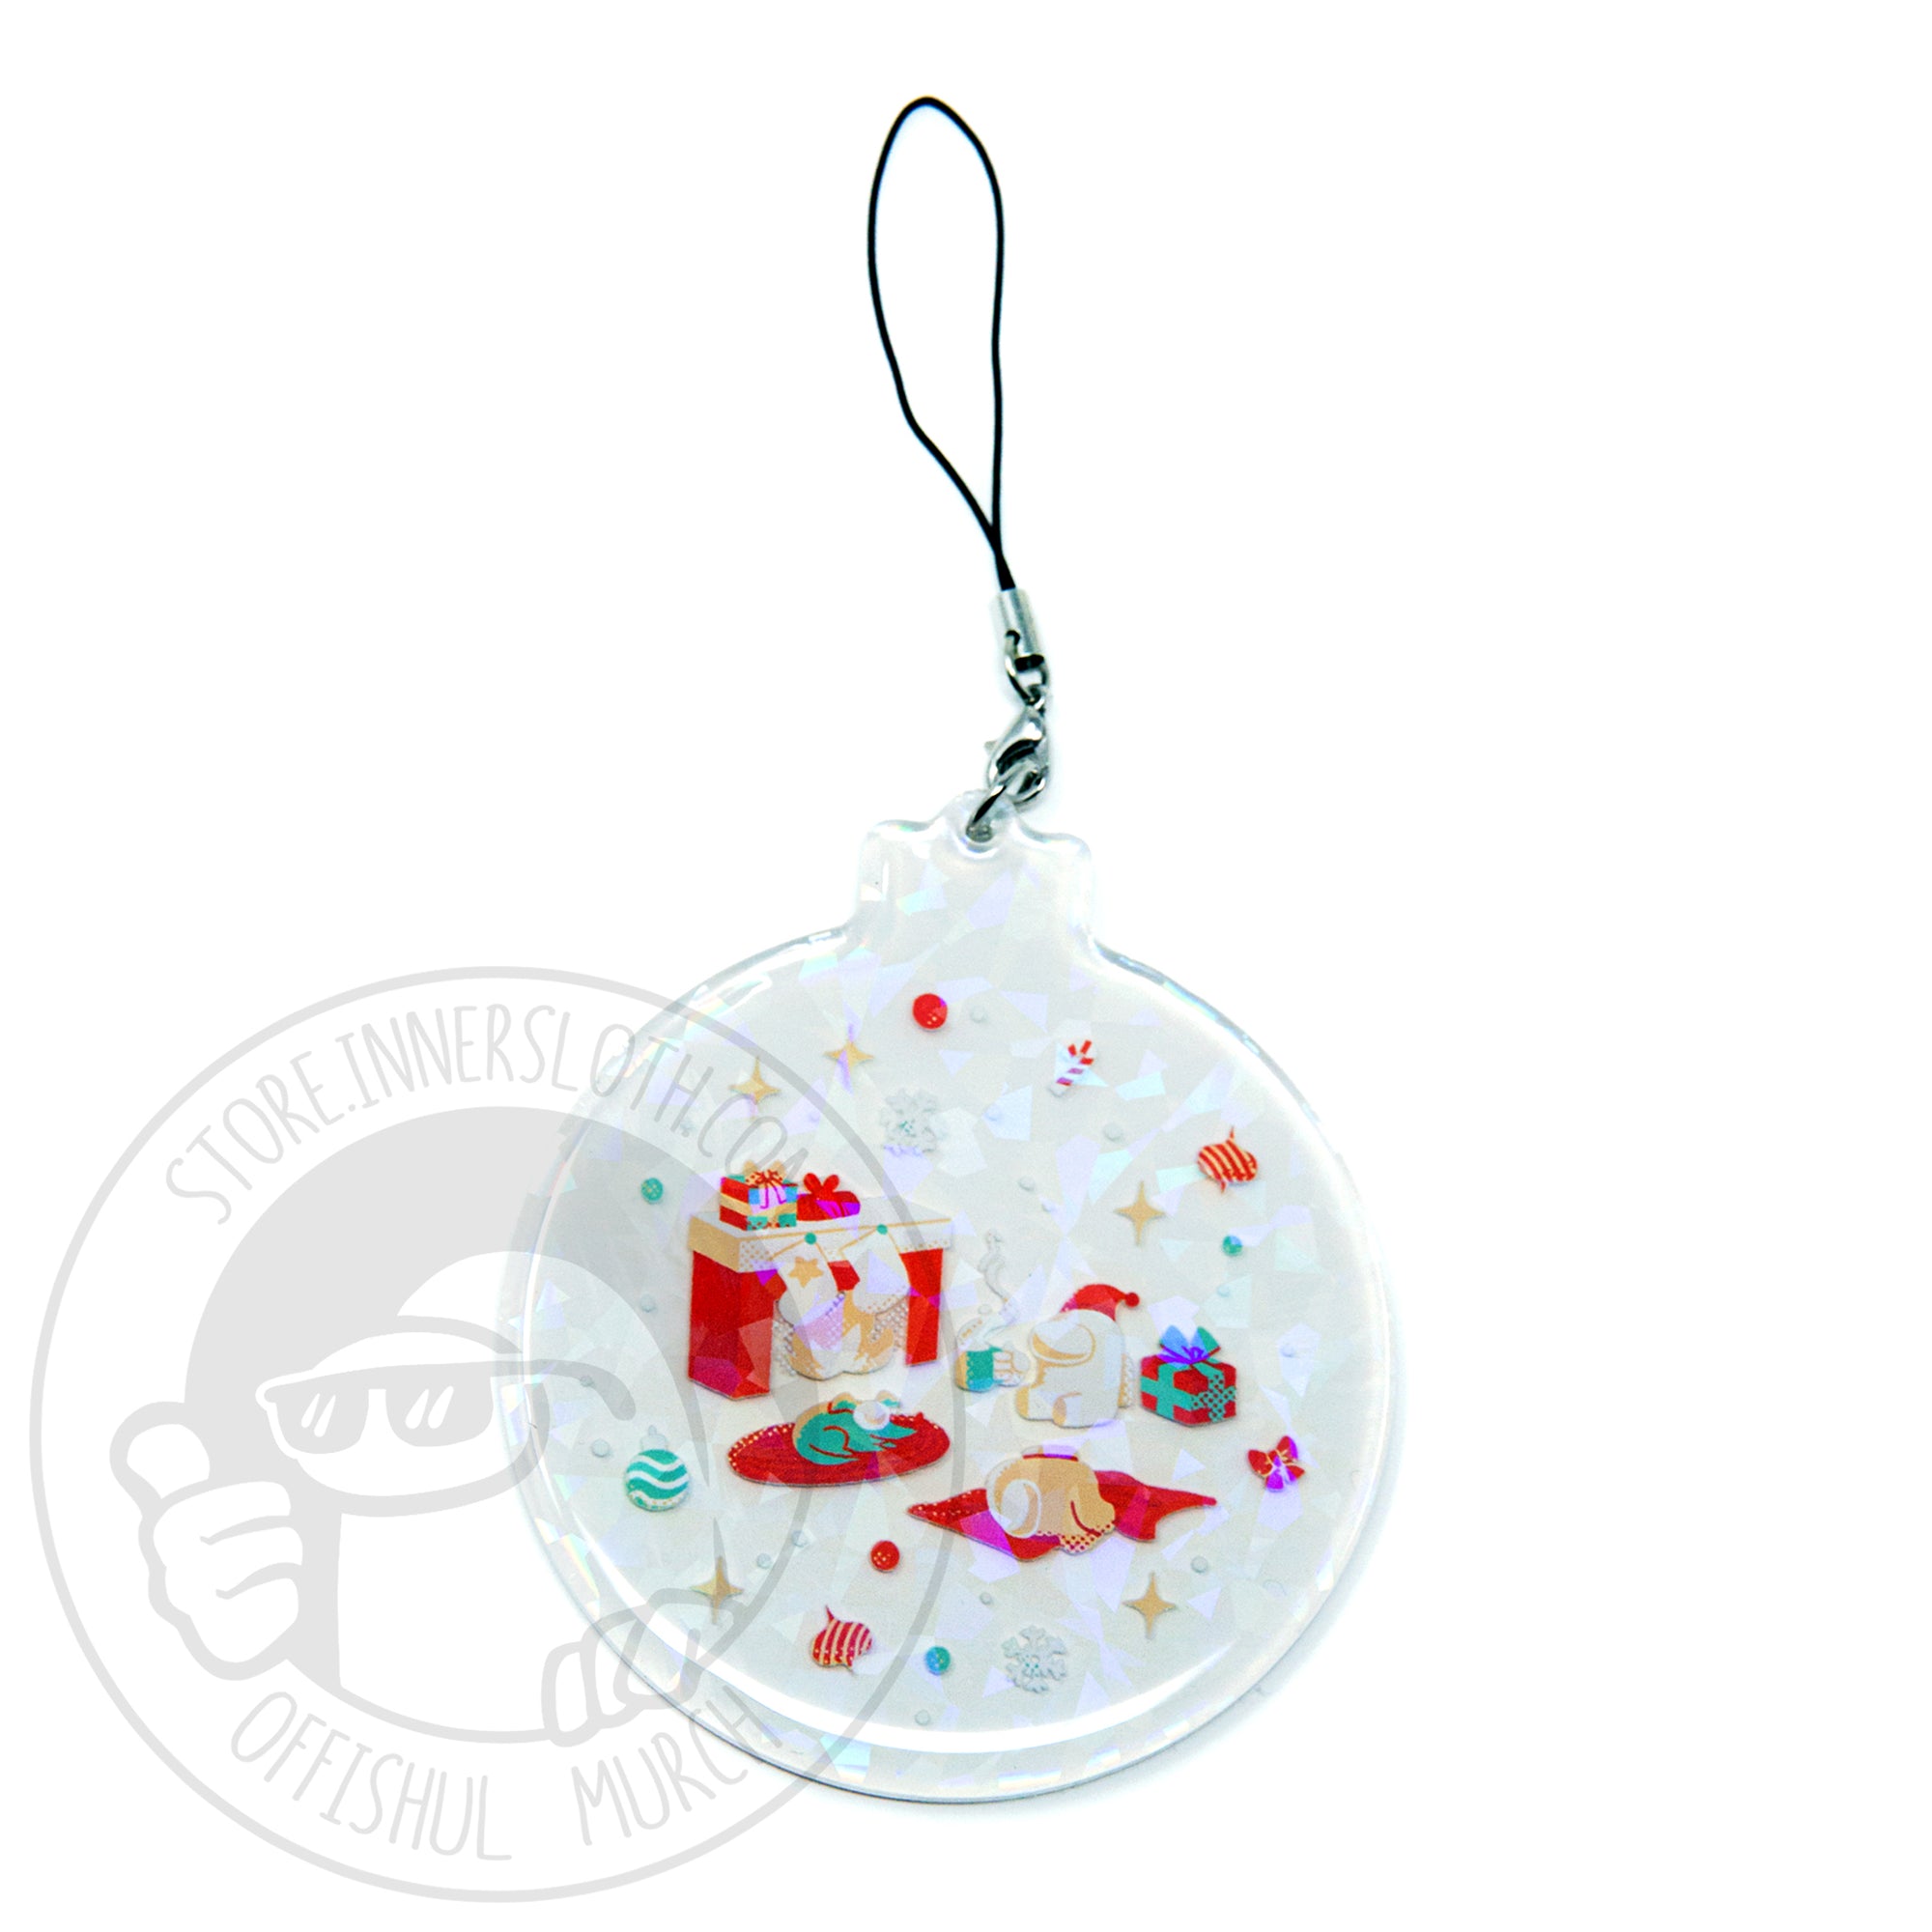 A photograph of four clear acrylic ornaments on a white background. Each ornament has its own shape and special holiday Crewmate illustration, each design is overlaid with iridescent sparkles. The ornaments are attached to a removable lobster clasp strap and jump ring. Designed by Mengmeng Liu.